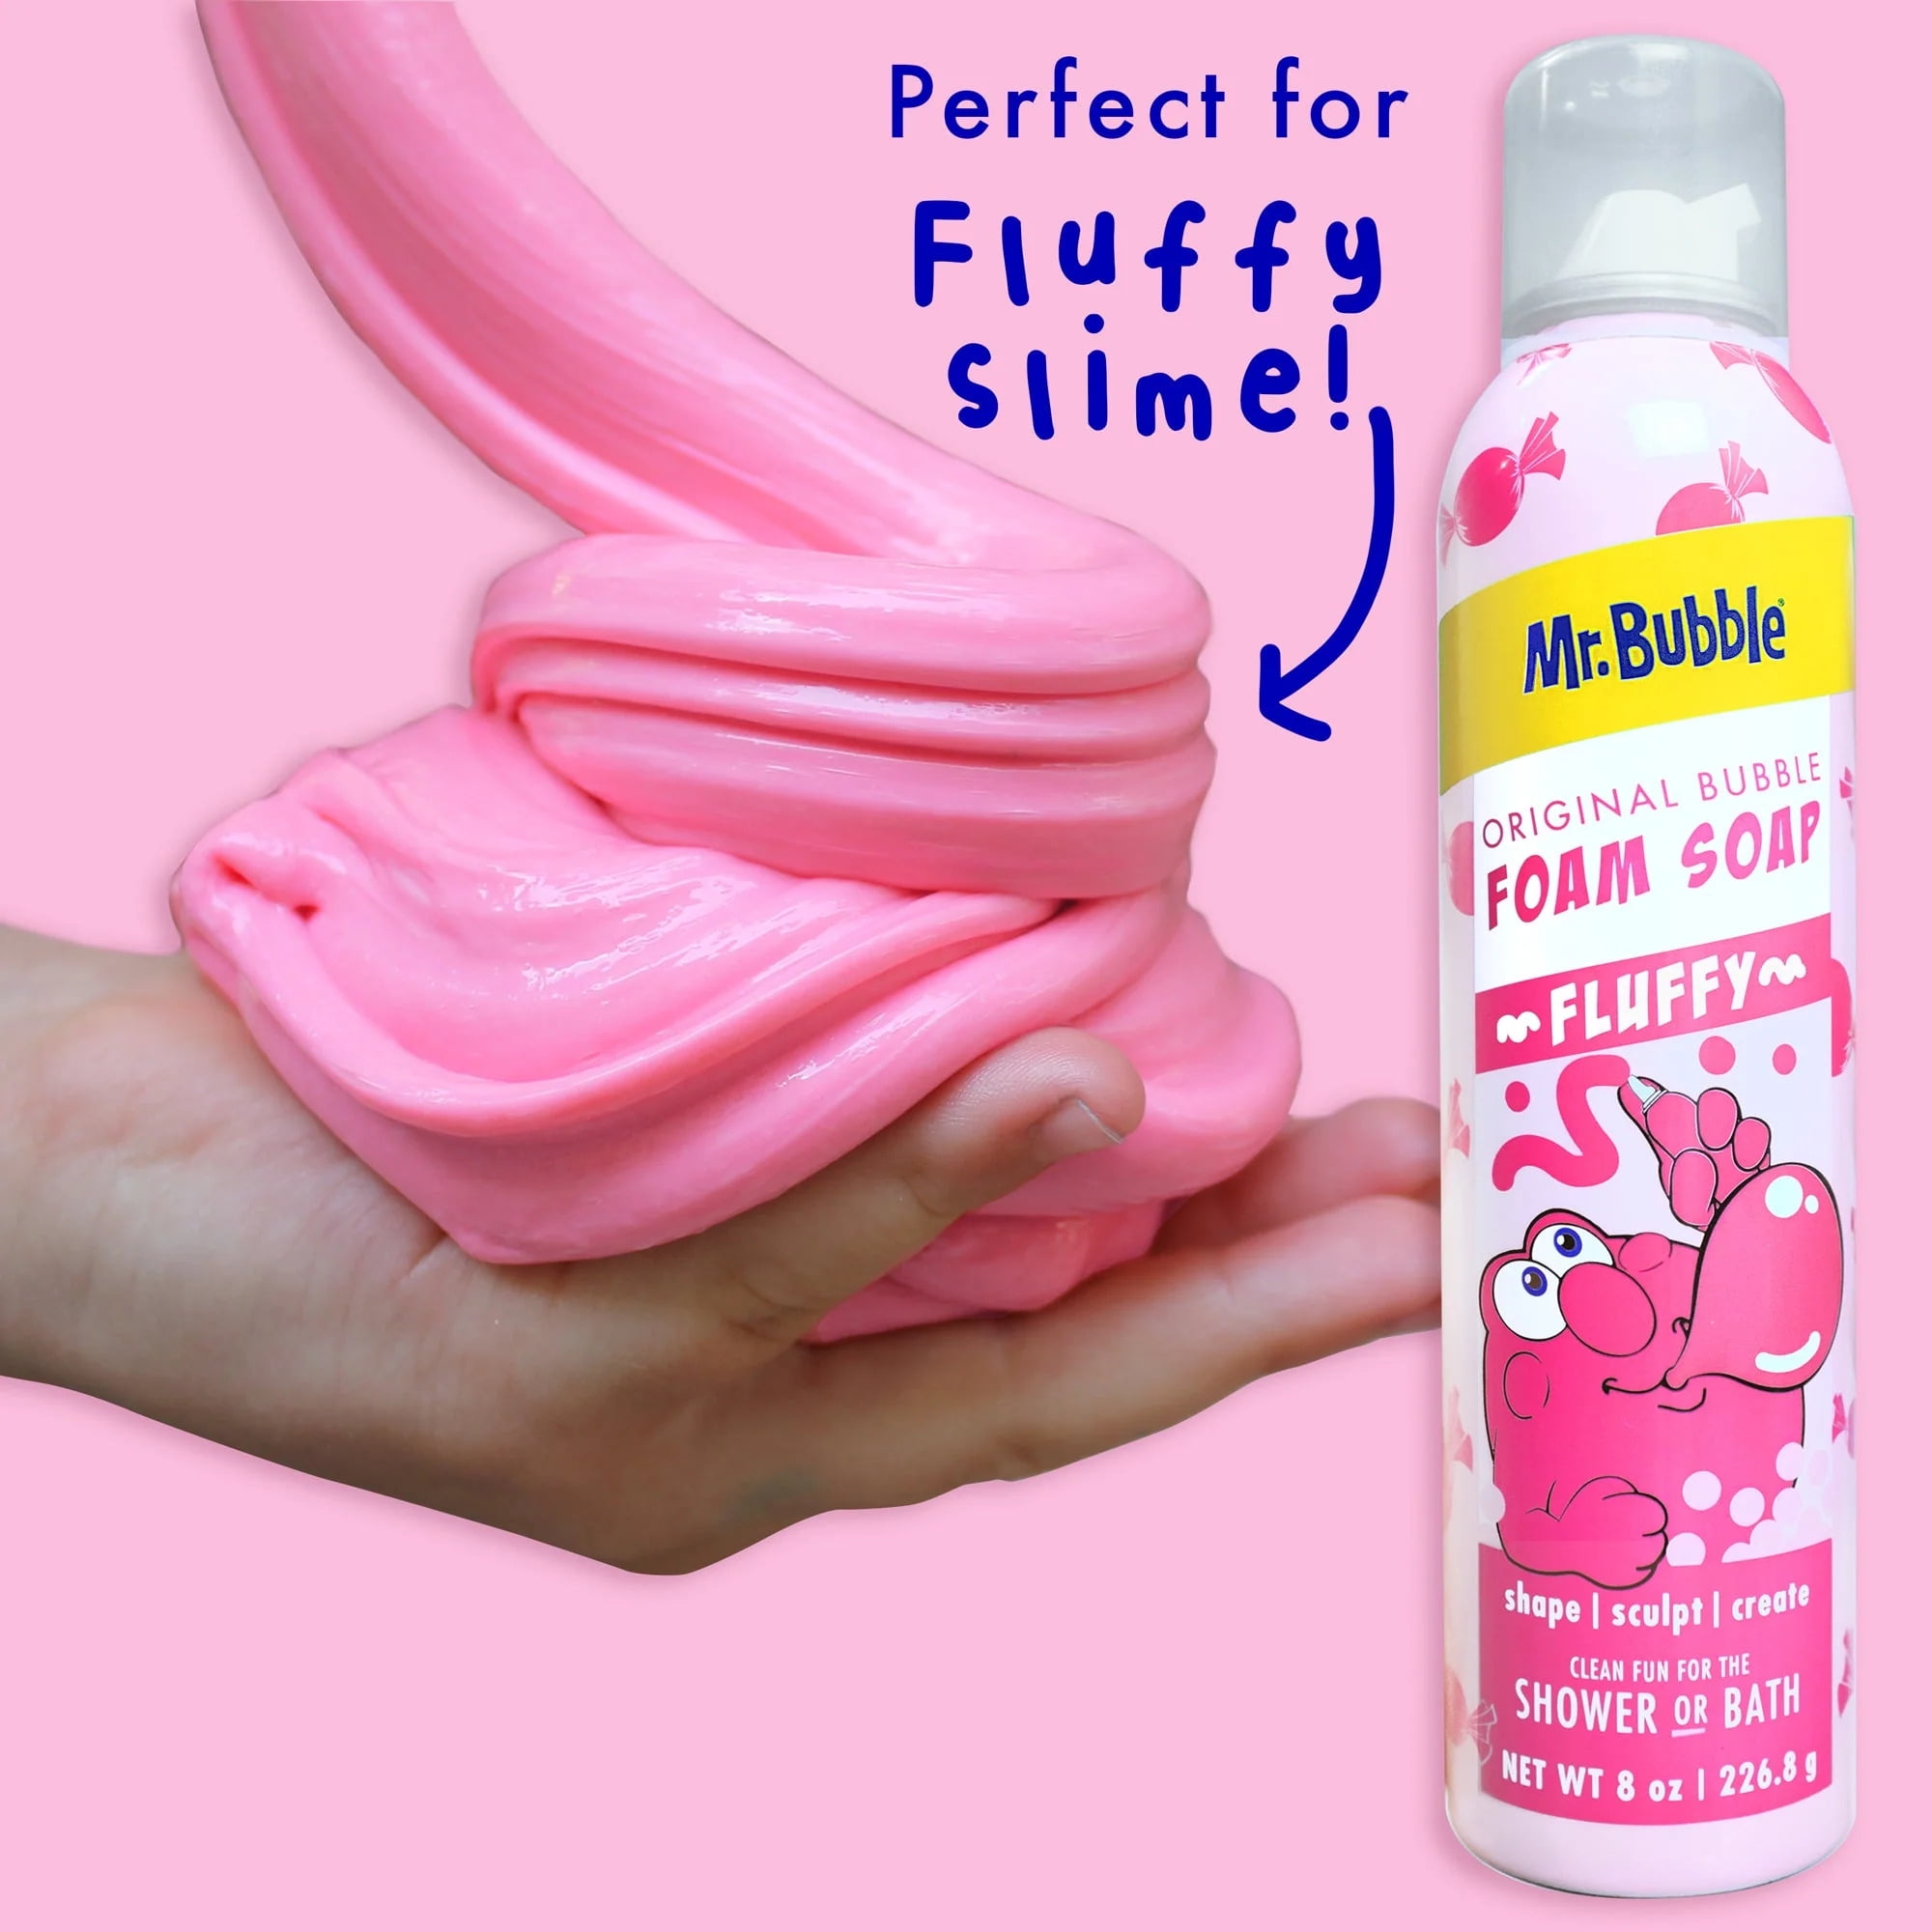 Sav-Mor Drugs - Mr. Bubble Foam Soap brings out your child's creativity and  makes bath time full of fun creations and silly memories. Your kids will  have a blast creating floating foam